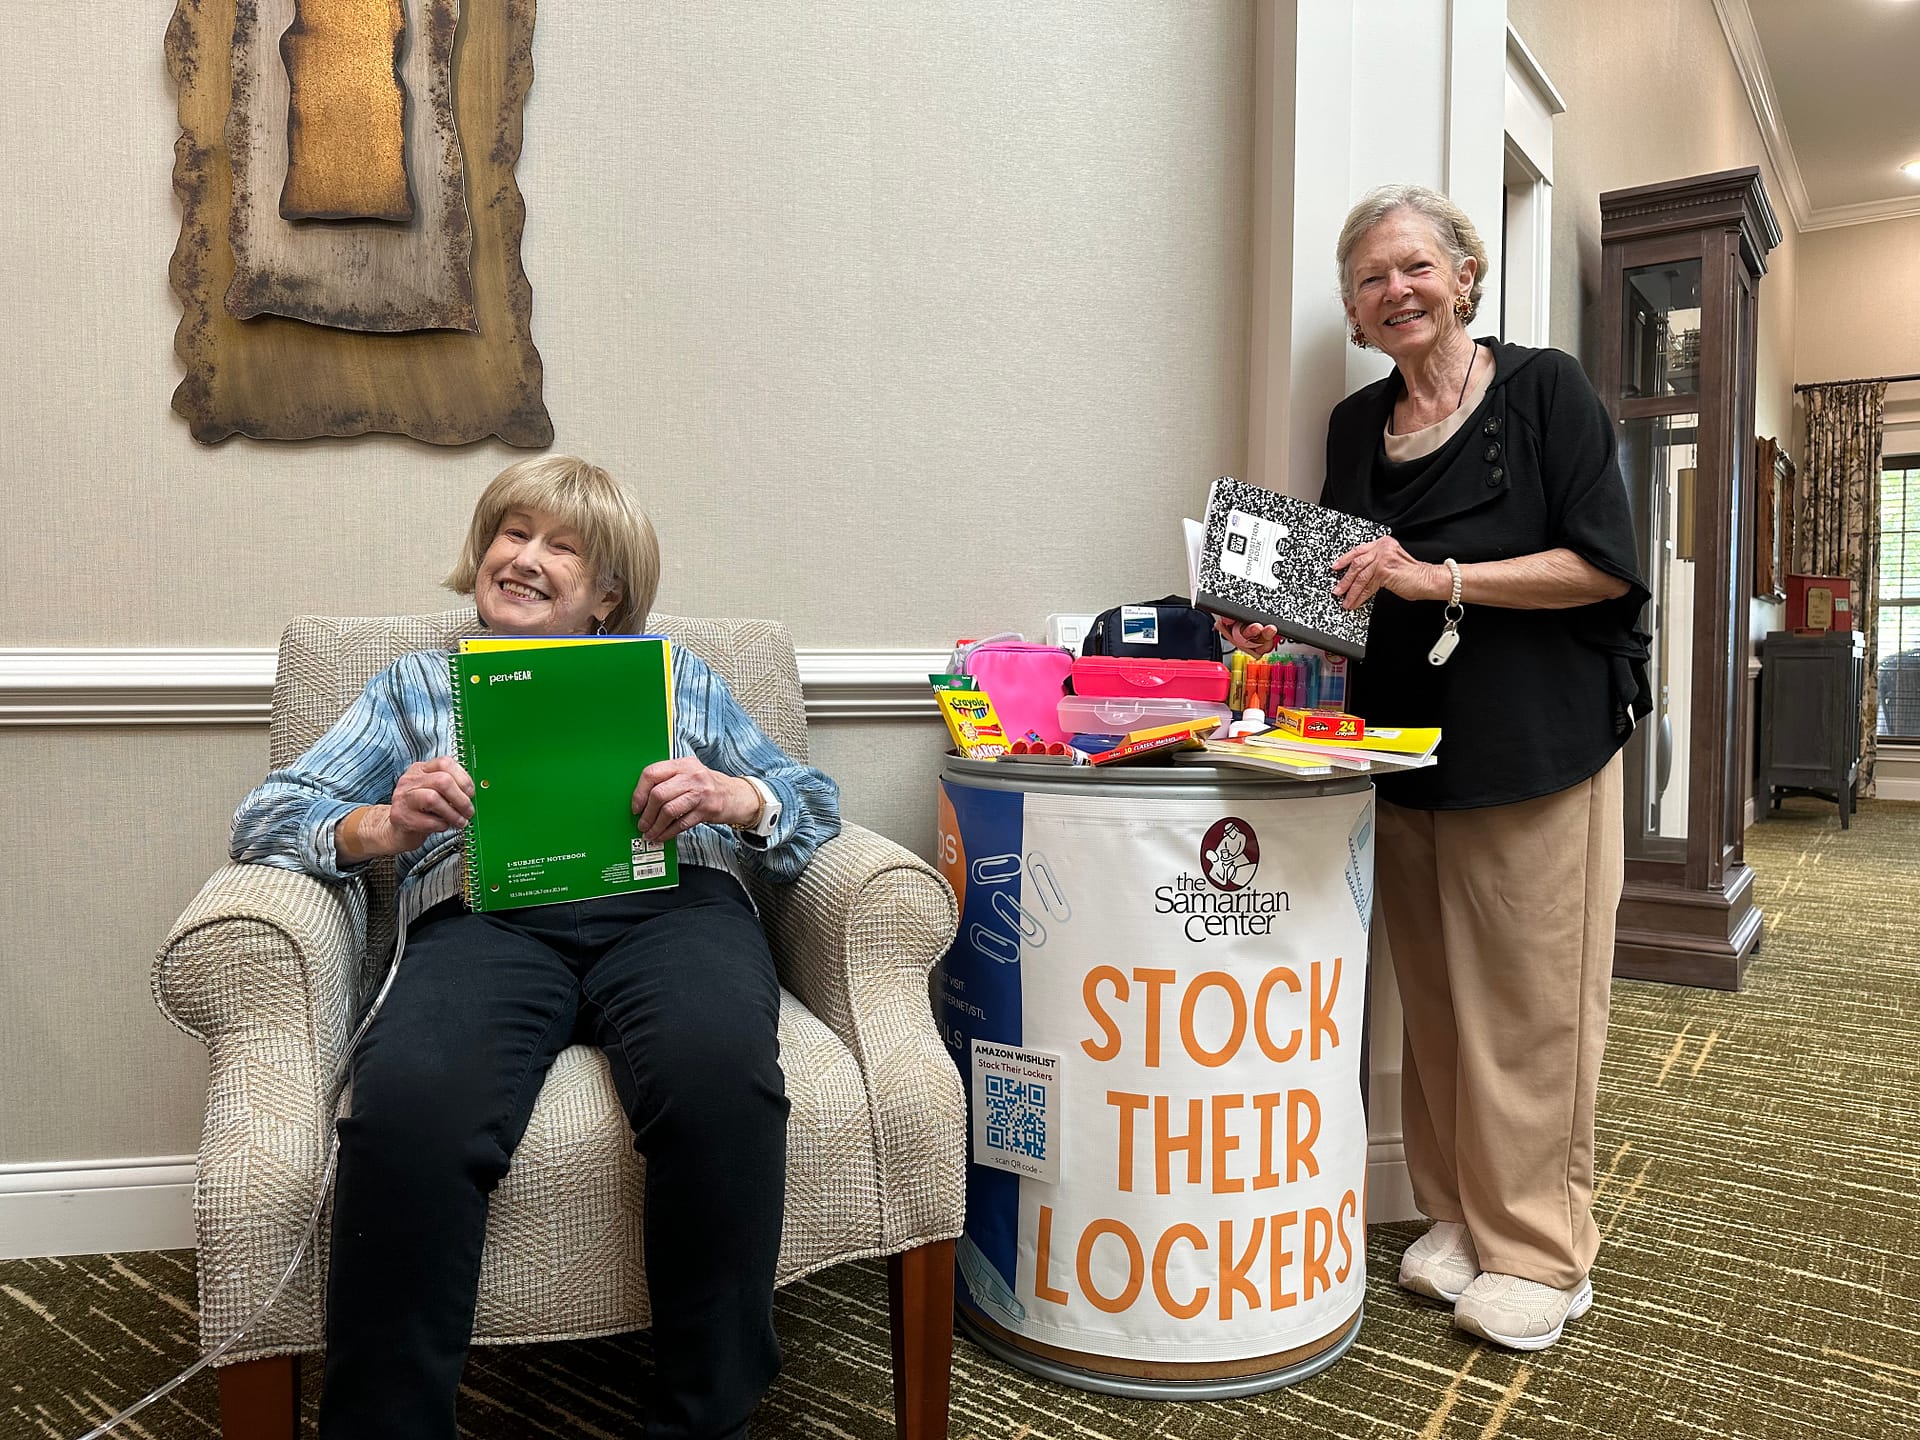 Morning Pointe of Chattanooga residents Erika Brouner (seated) and Donna Stetler (standing), with the Stock Their Lockers barrel